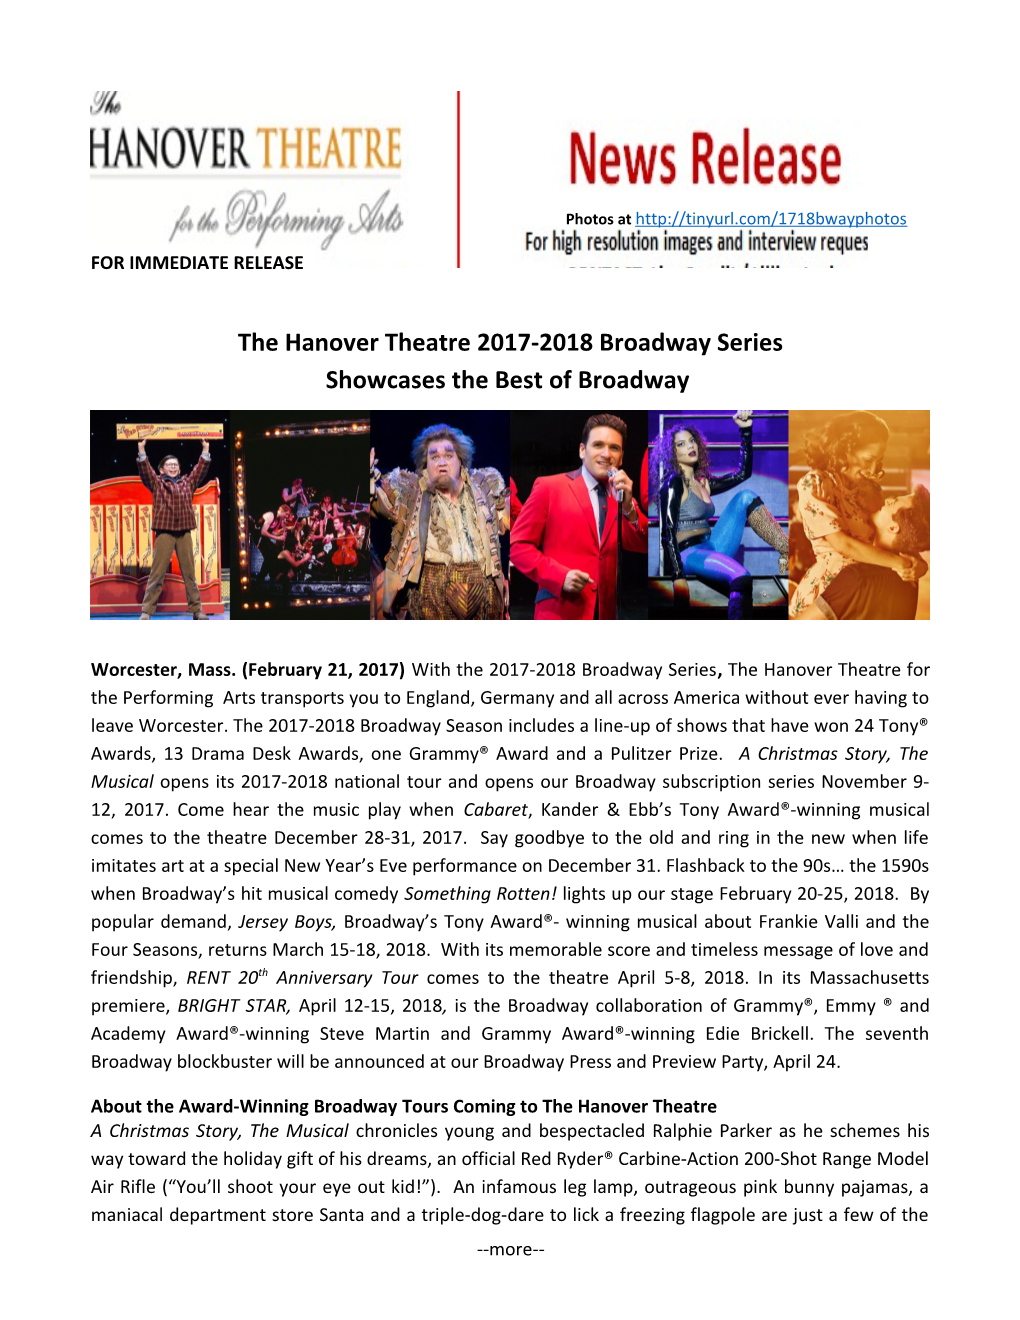 The Hanover Theatre 2017-2018 Broadway Series Showcases the Best of Broadway